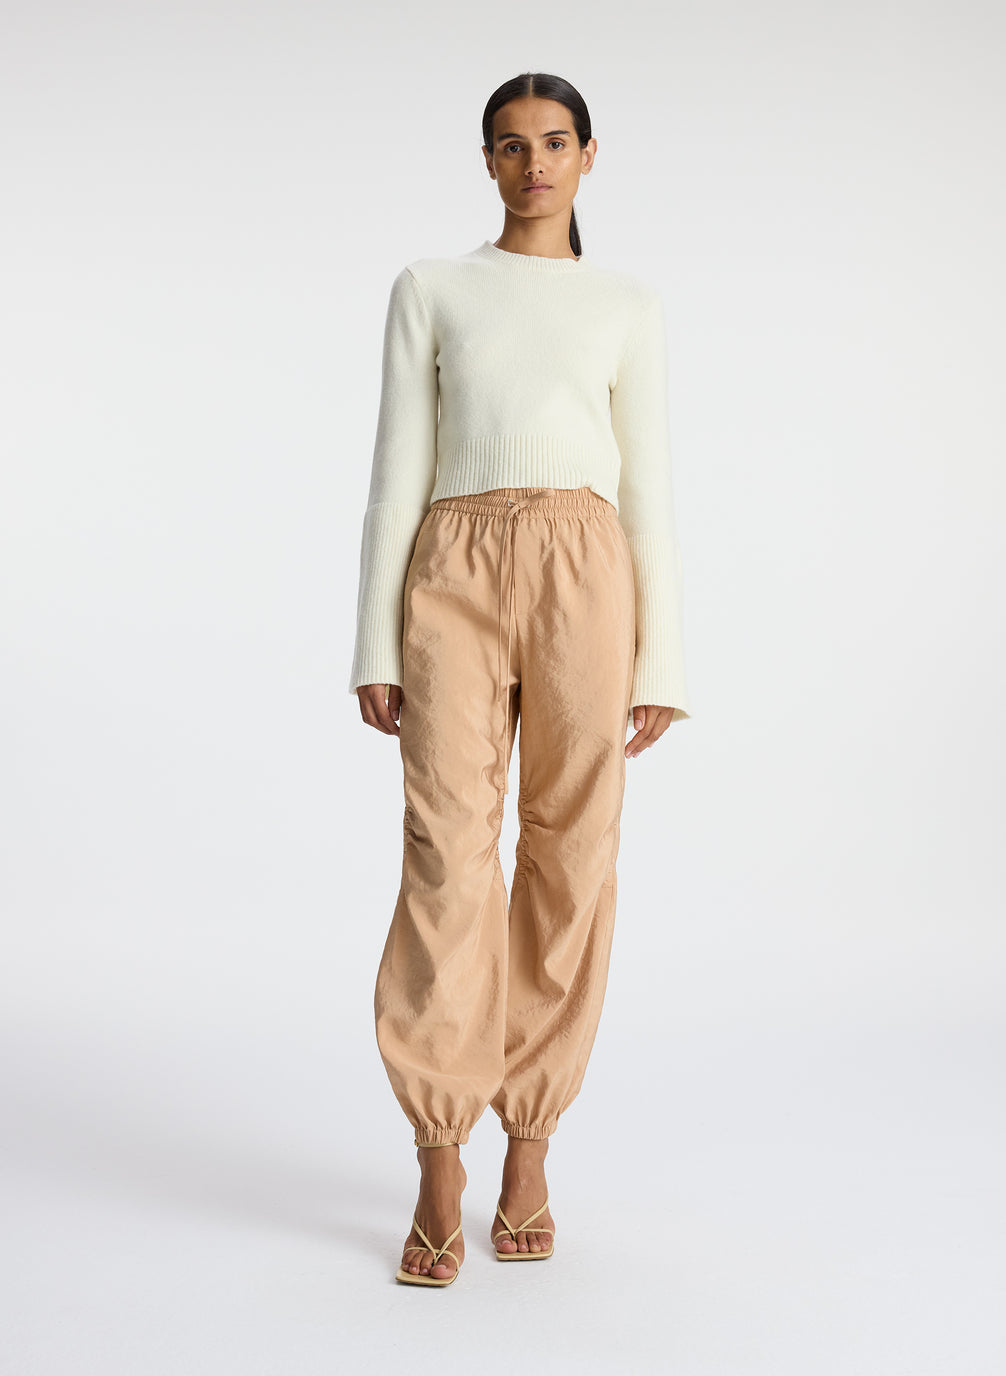 front view of woman wearing white sweater and beige nylon drawstring pants